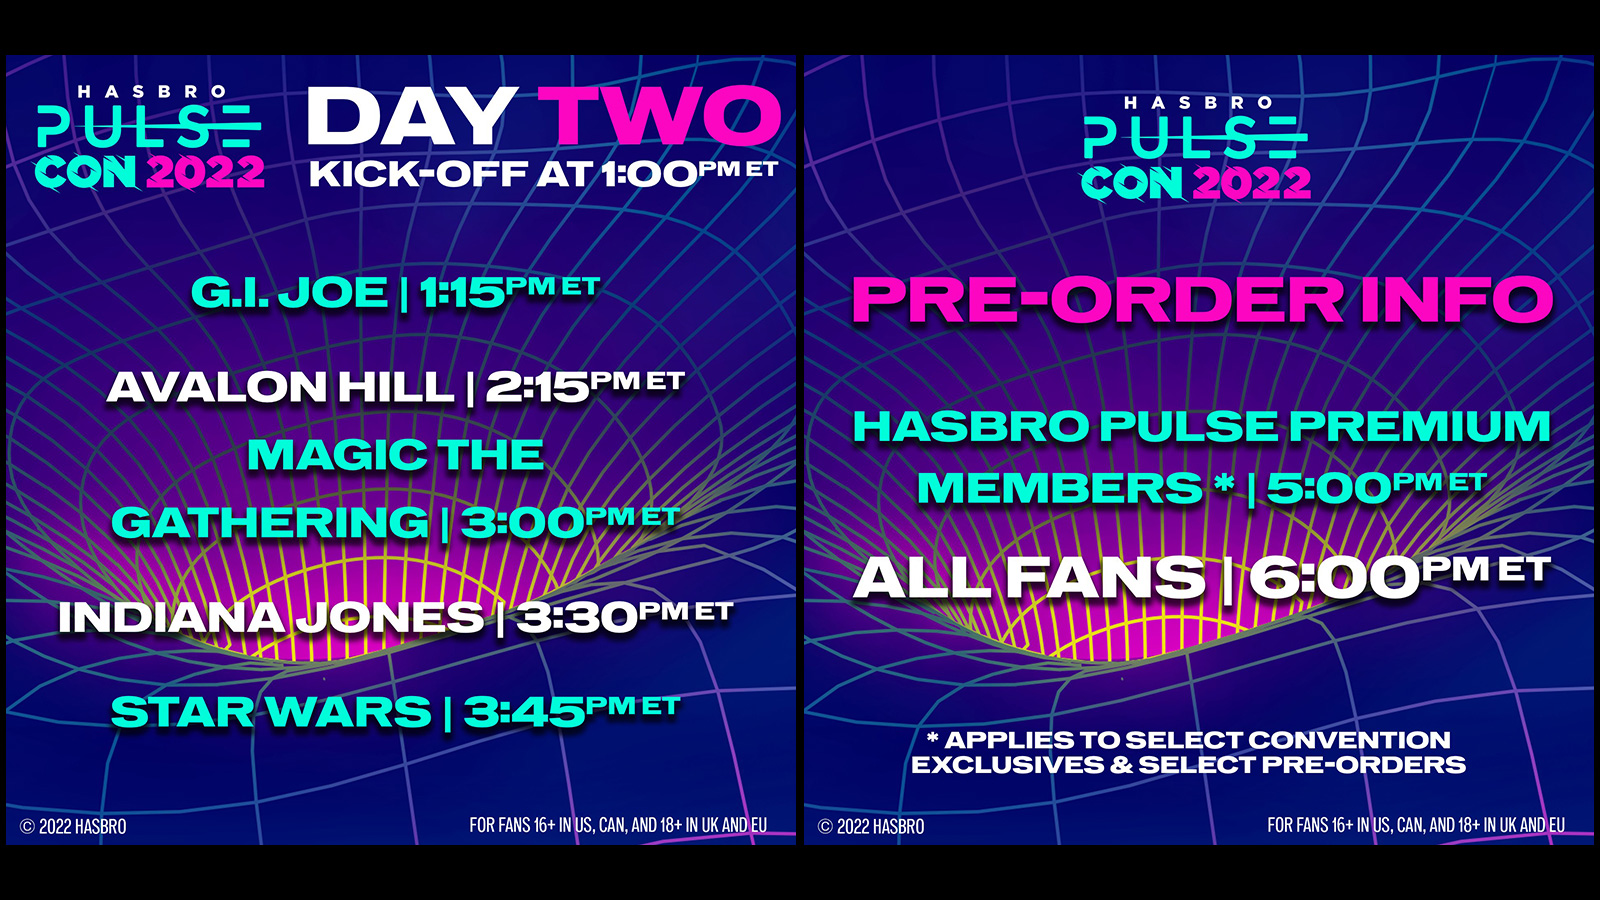 Hasbro Pulse Con 2022 Star Wars Panel 10/1/22 At 3:45 PM ET - Preorders Schedule Also